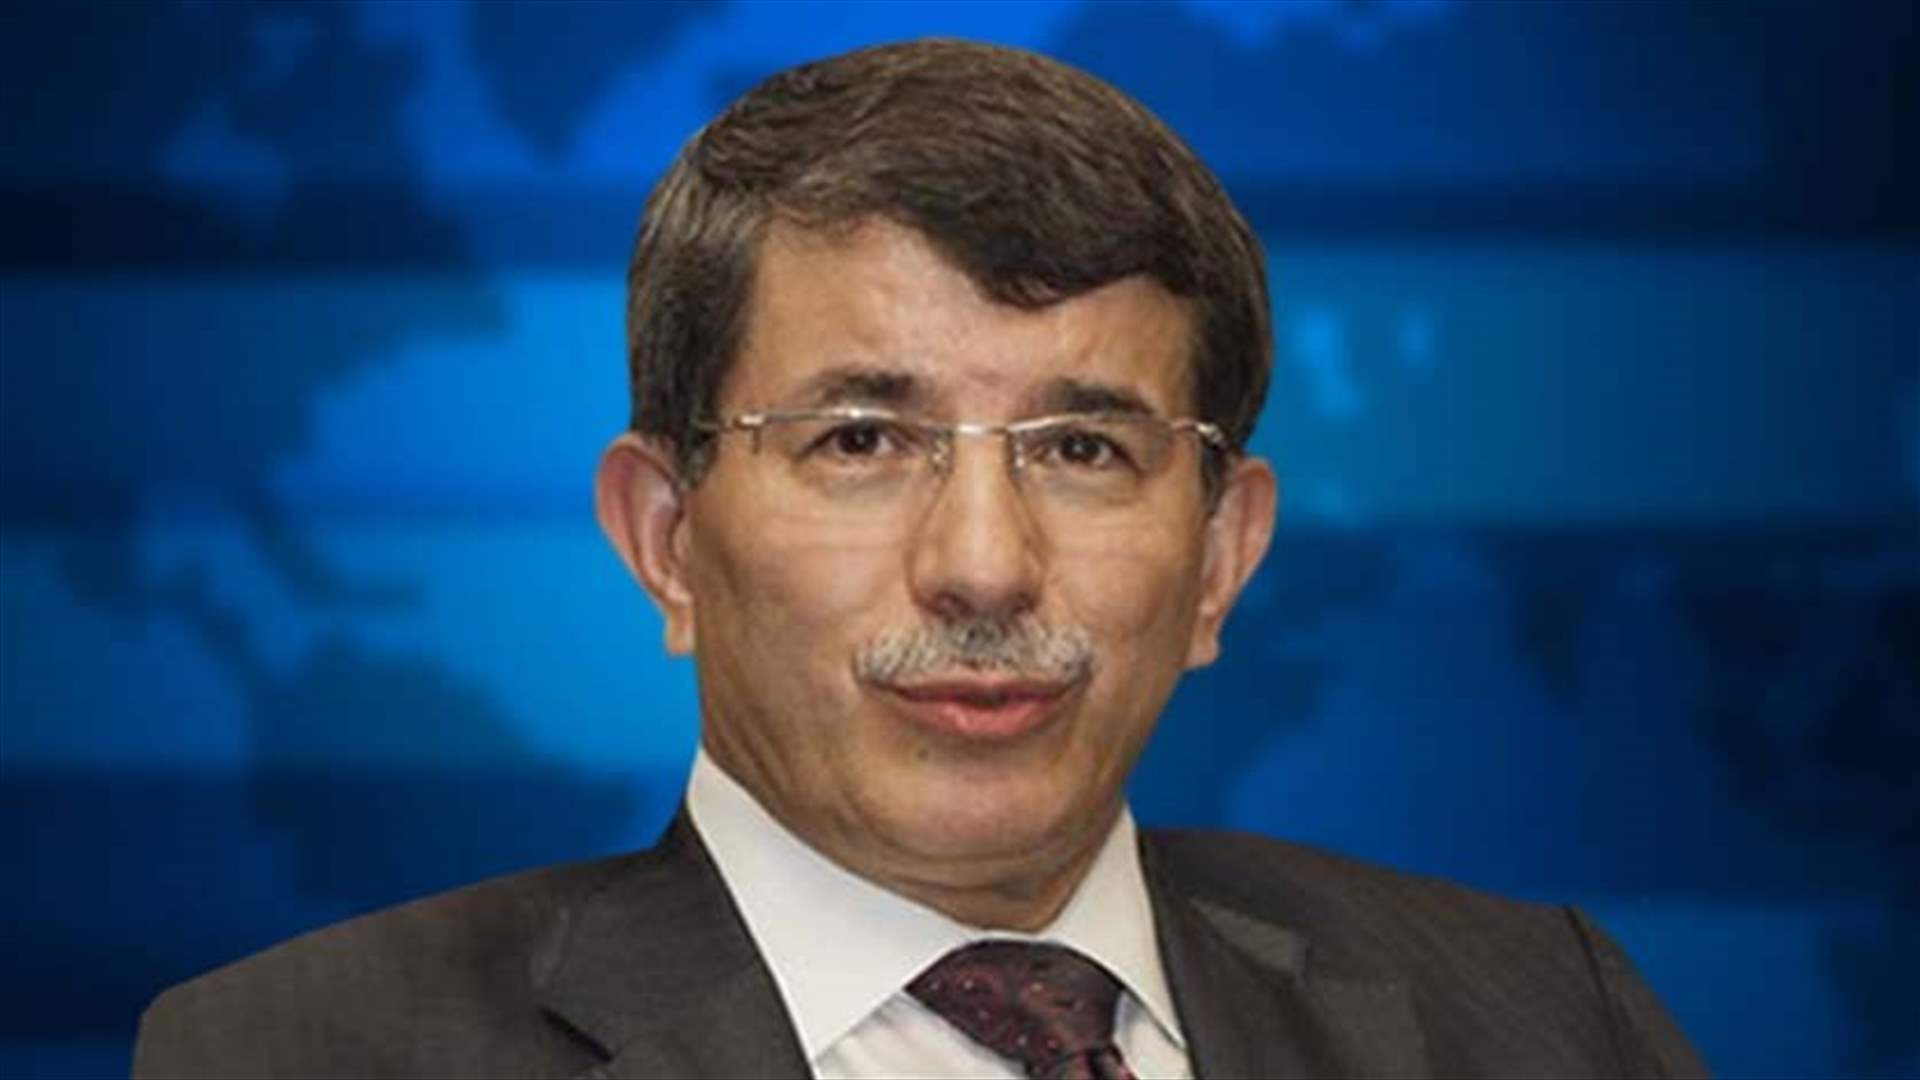 Turkey to take additional security measures after bombing -PM Davutoglu